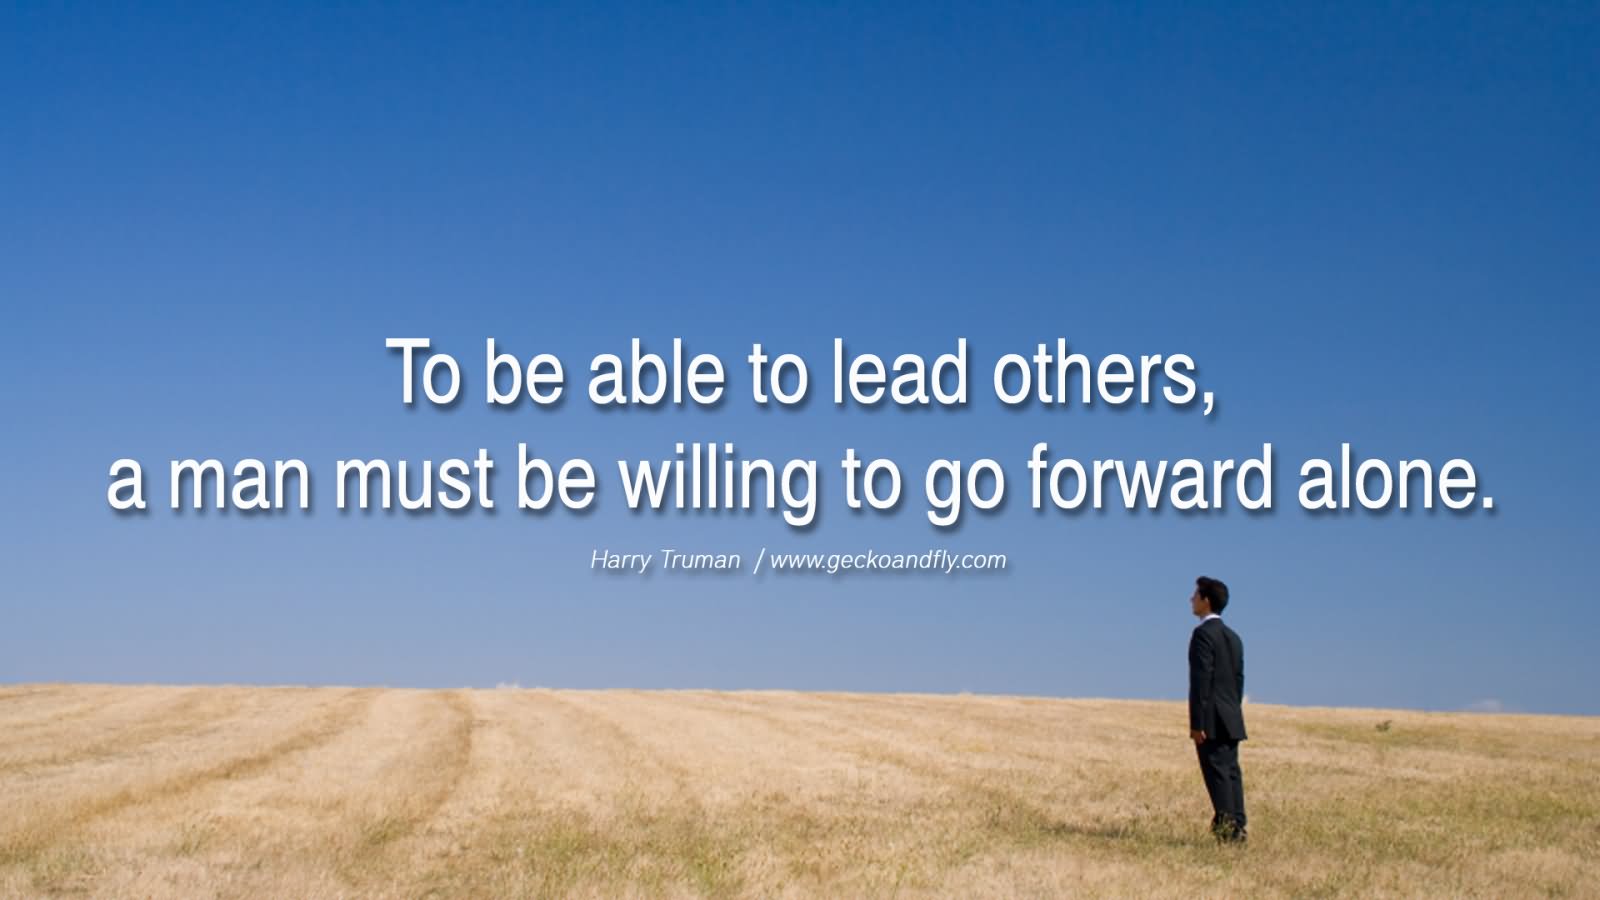 To be able to lead others, a man must be willing to go forward alone.